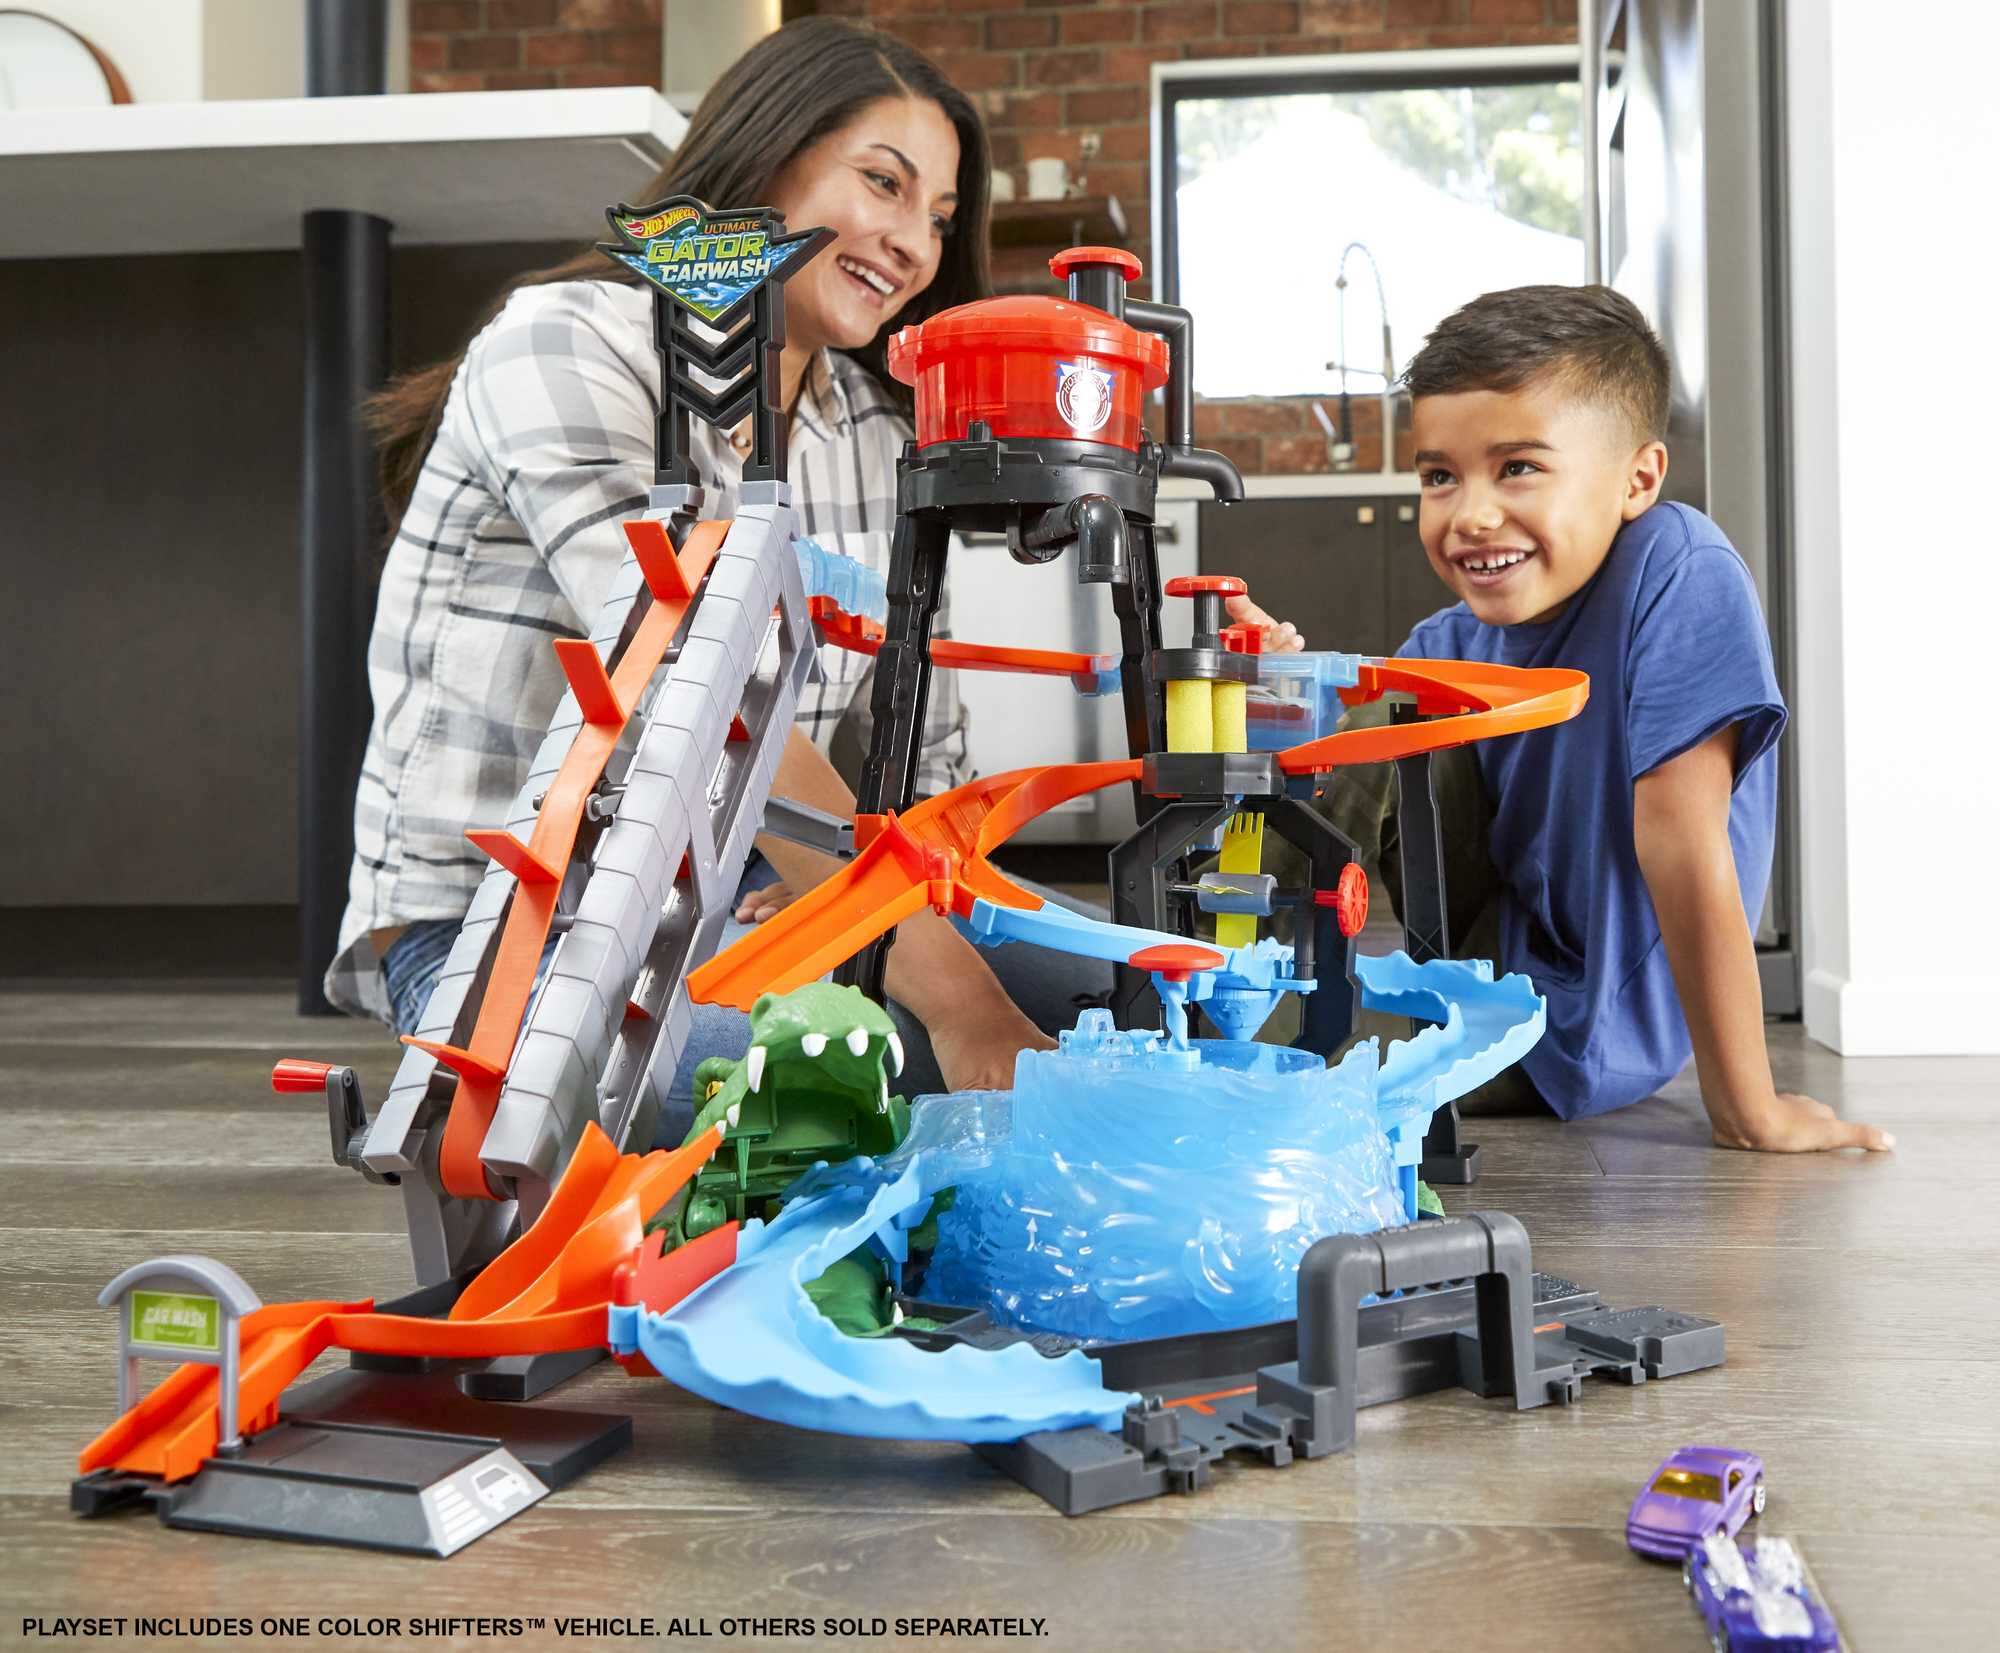 Hot Wheels Ultimate Gator Car Wash Playset with Color Shifters Toy Car in 1:64 Scale - image 3 of 7